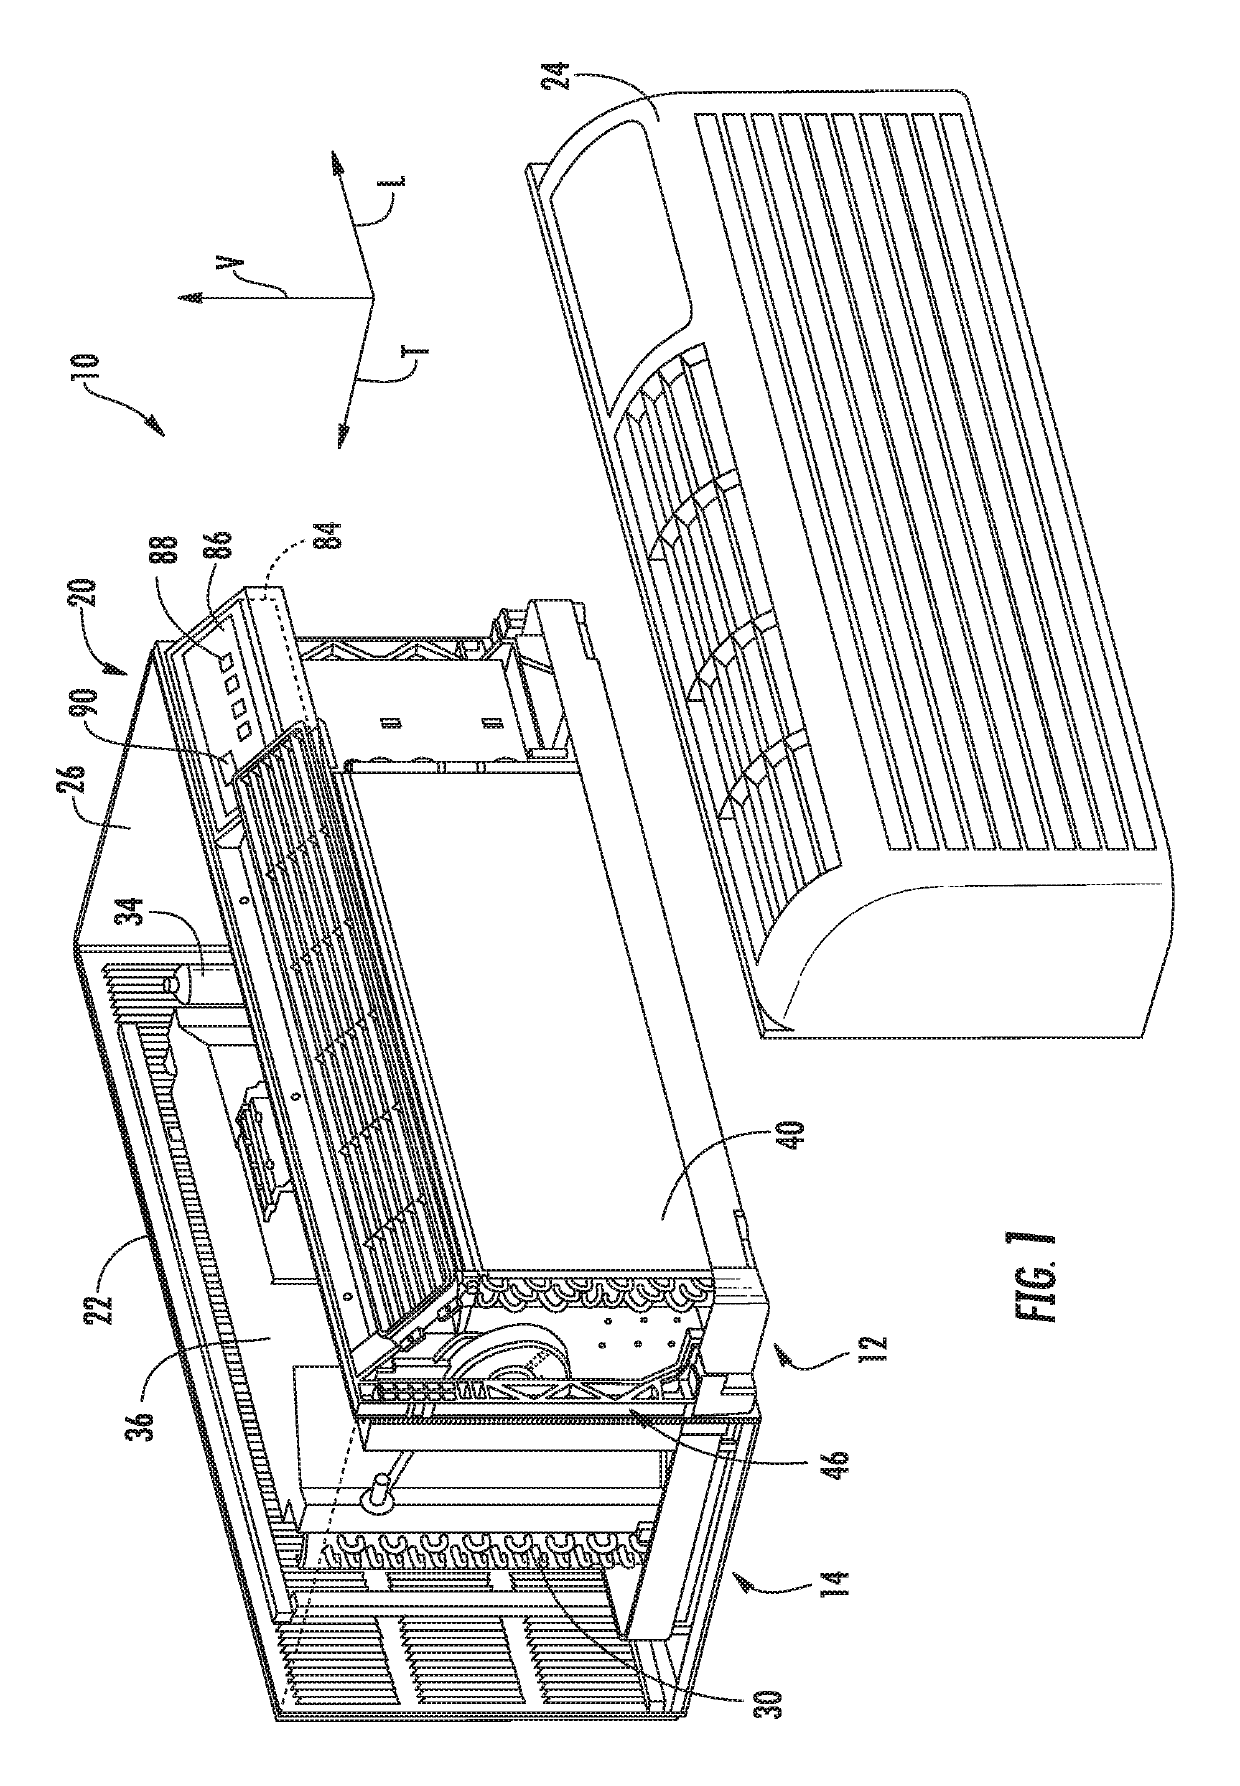 Packaged terminal air conditioner unit with vent door position detection